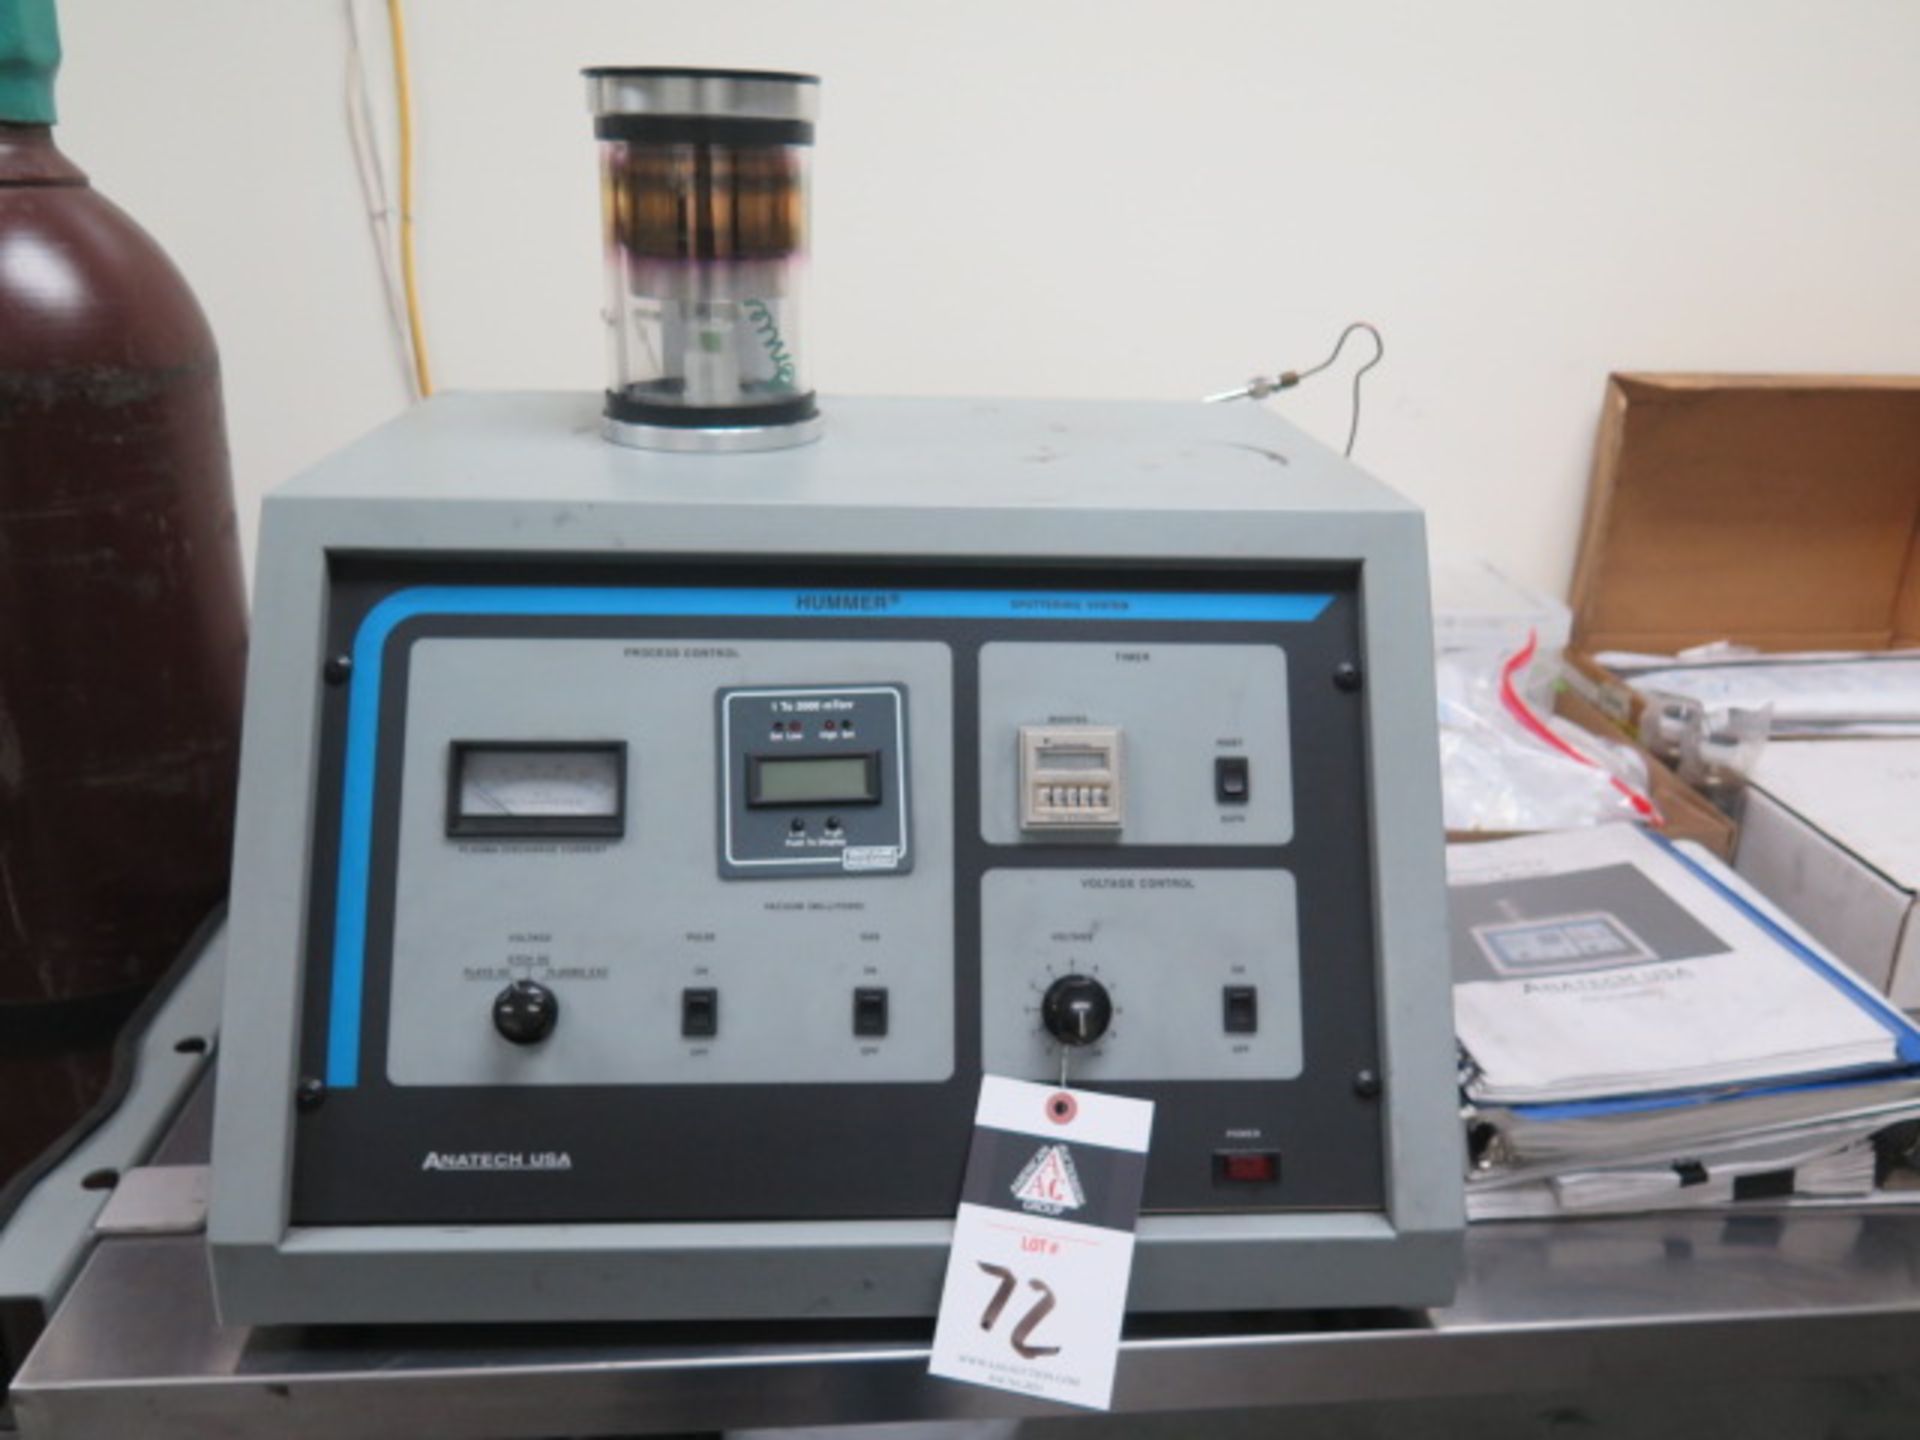 2013 Anatech USA “Hummer 6.2” Sputter Coating System s/n 1027145, SOLD AS IS WITH NO WARRANTY